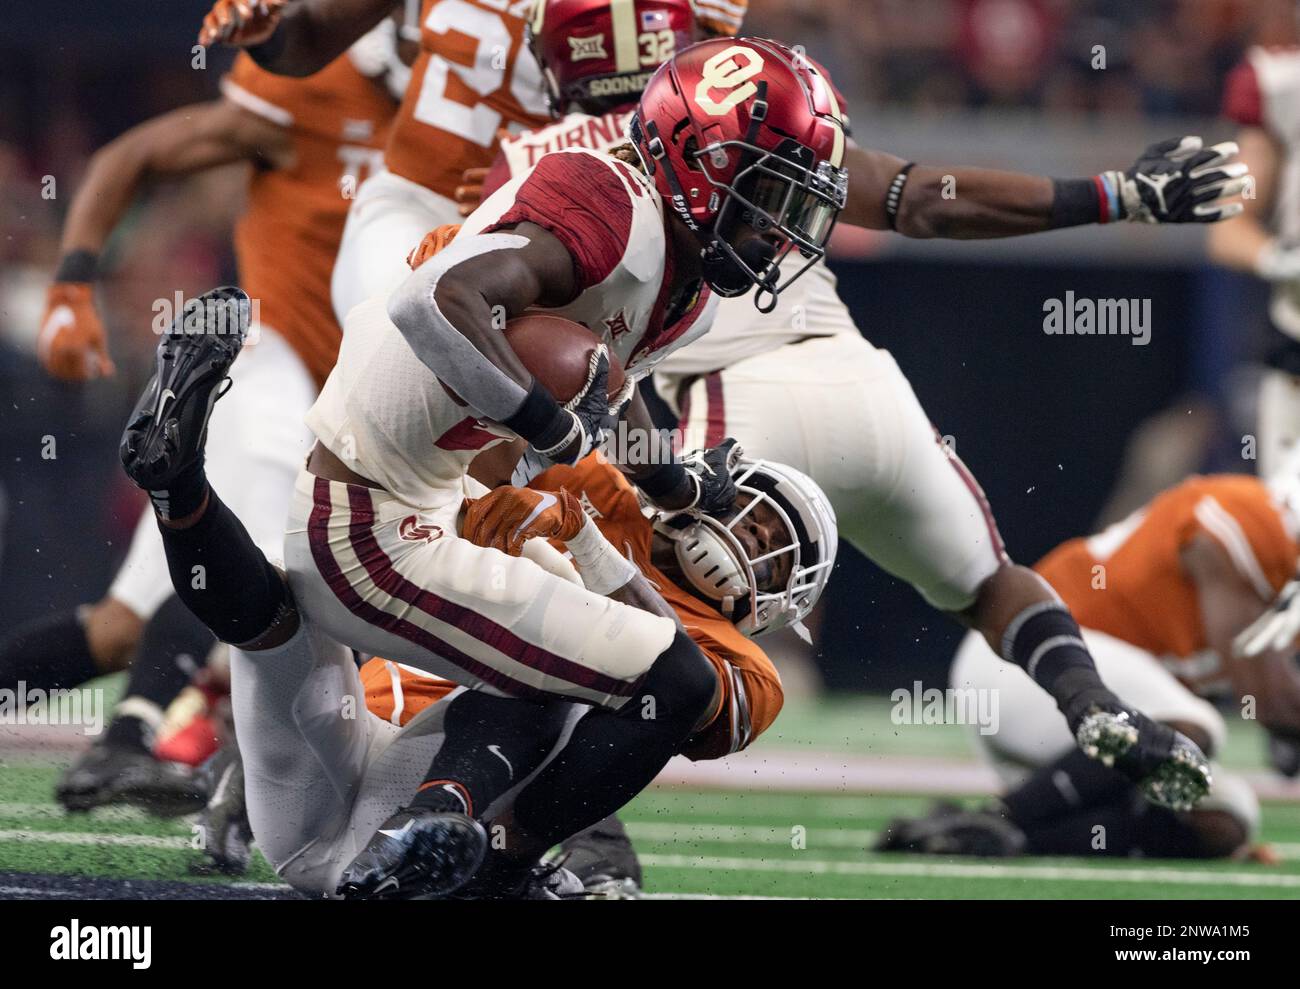 https://c8.alamy.com/comp/2NWA1M5/oklahoma-special-teams-ceedee-lamb-2-is-tackled-by-texas-defensive-back-josh-thompson-29-as-he-attempts-to-return-a-kick-during-the-big-12-conference-championship-ncaa-football-game-saturday-december-1-2018-in-arlington-tex-oklahoma-leads-20-14-at-the-halftime-tfv-media-via-ap-2NWA1M5.jpg